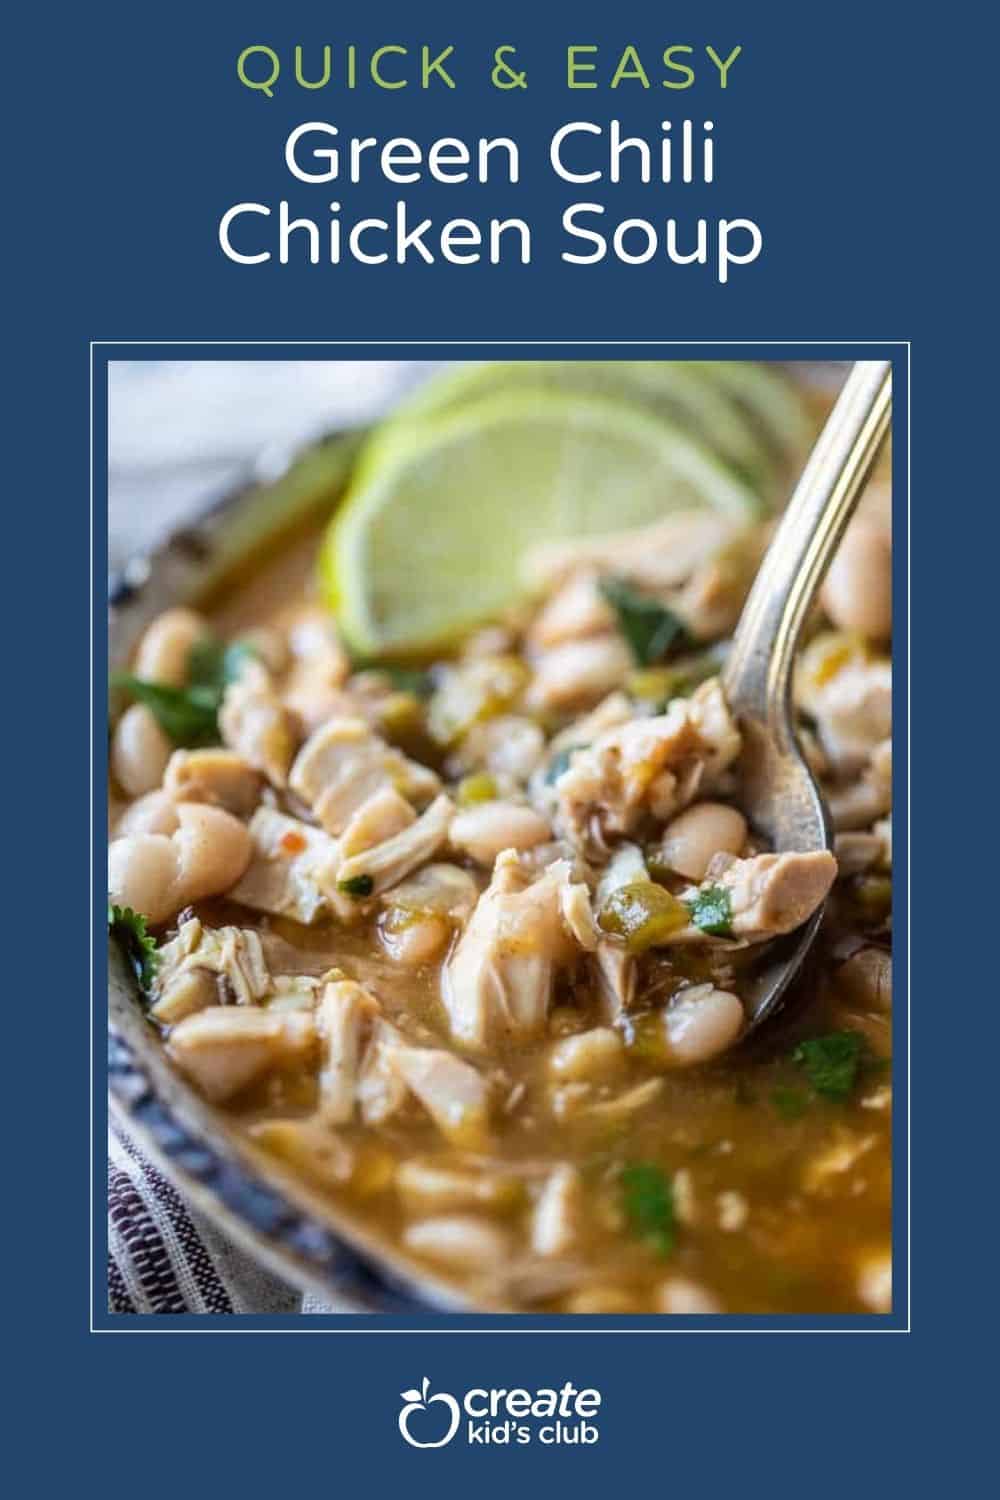 pin of green chili chicken soup